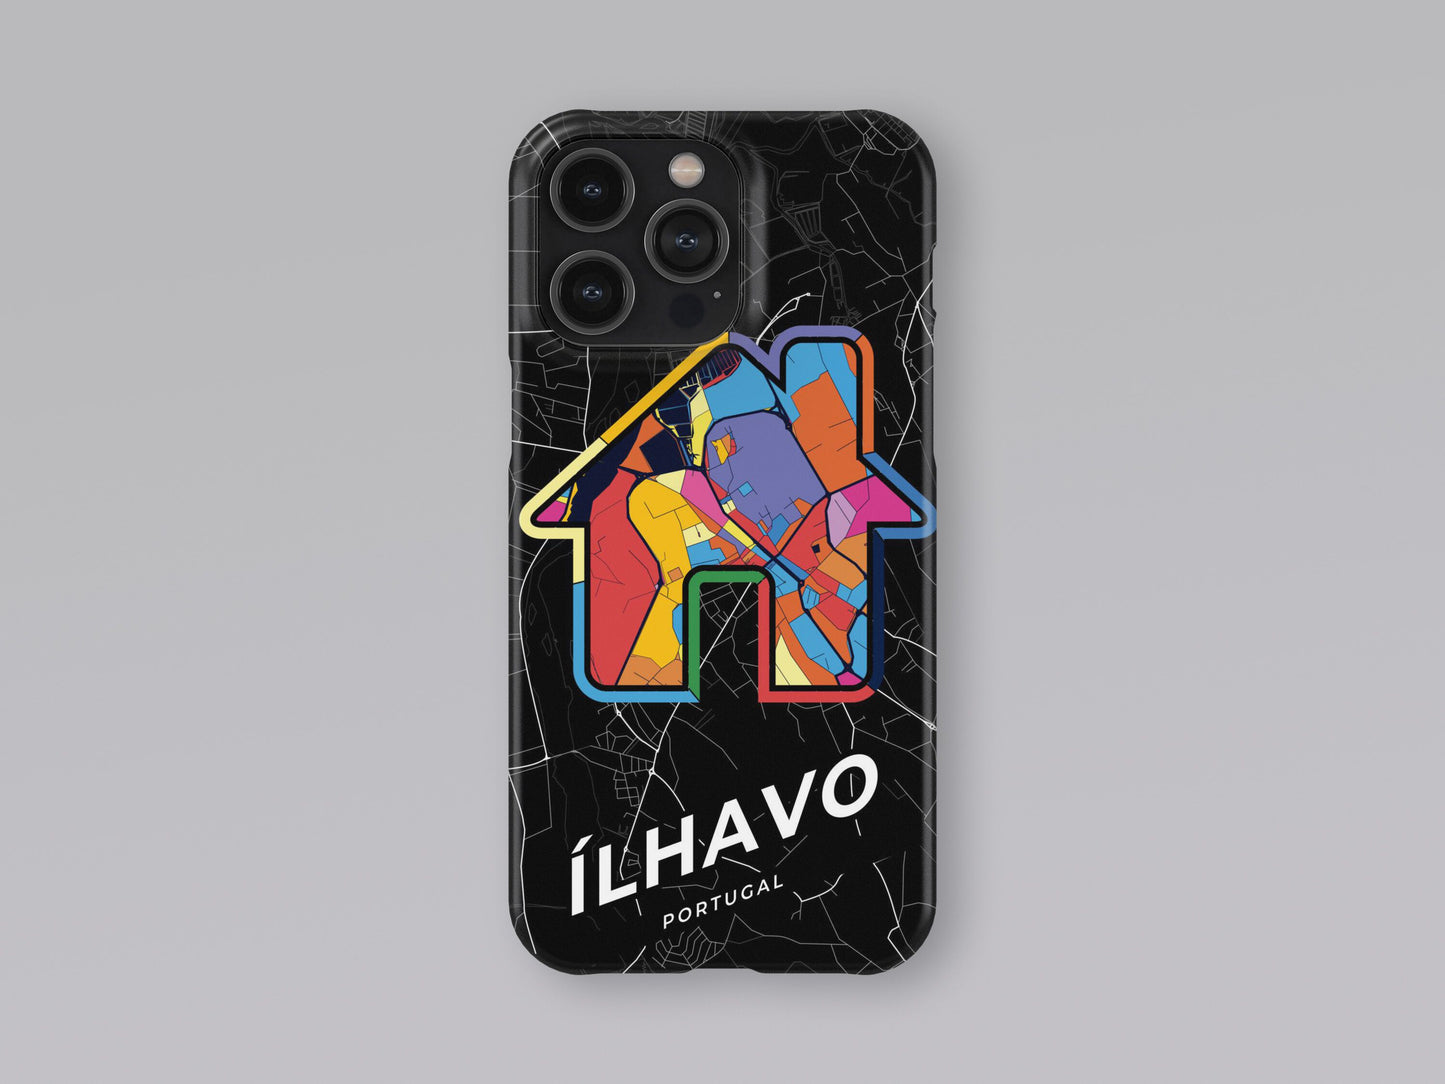 Ílhavo Portugal slim phone case with colorful icon. Birthday, wedding or housewarming gift. Couple match cases. 3